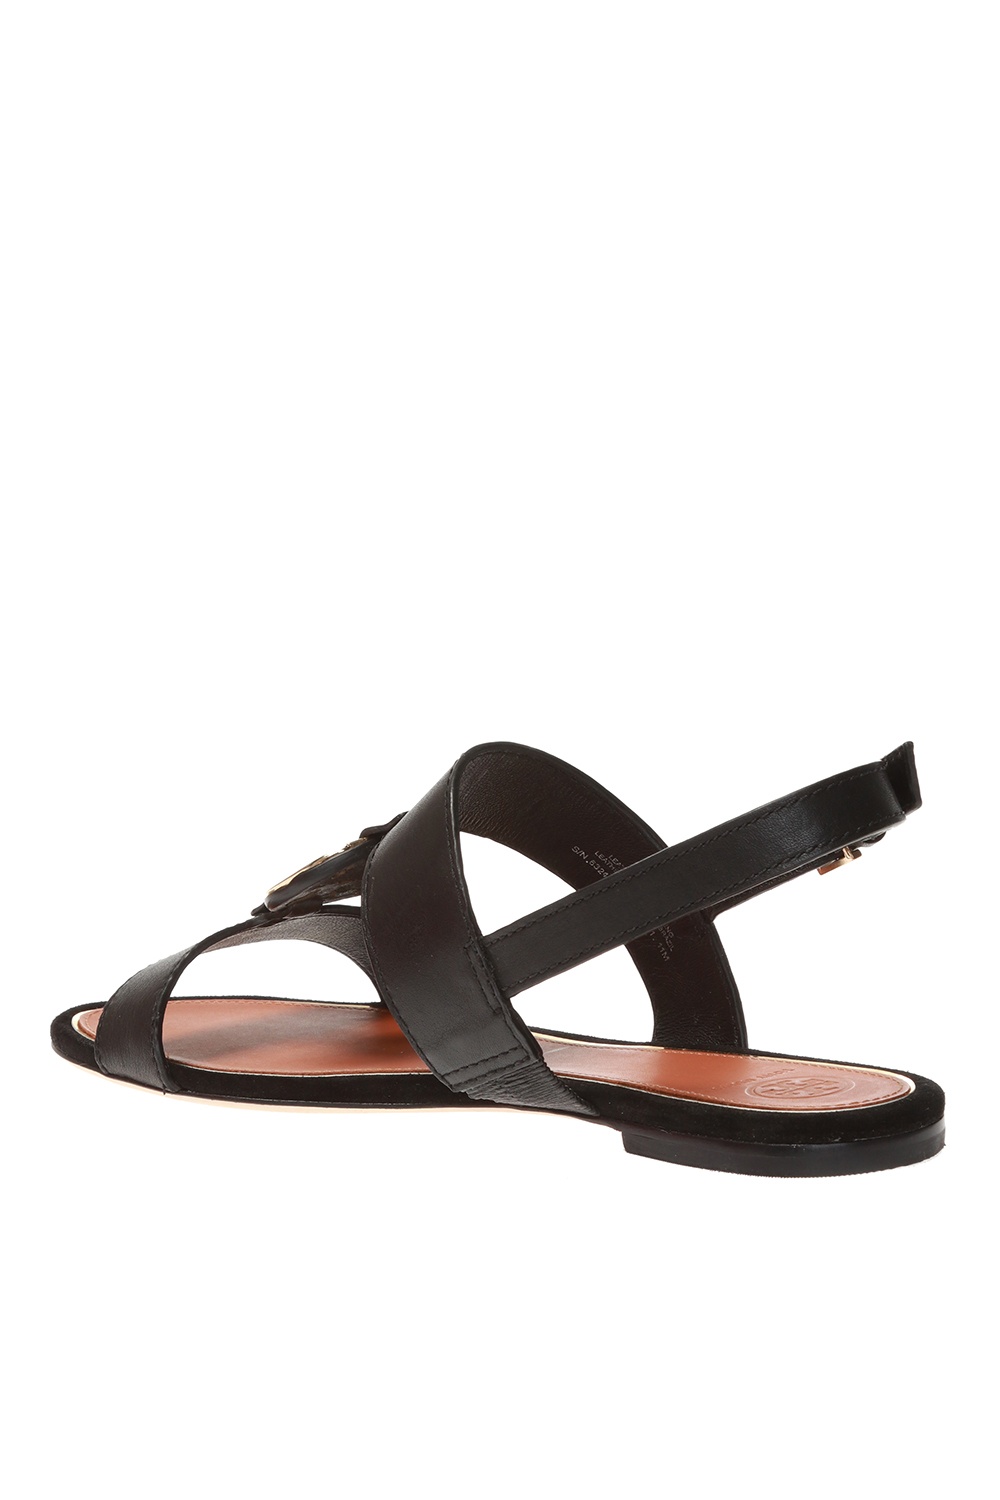 tory burch sandals cost